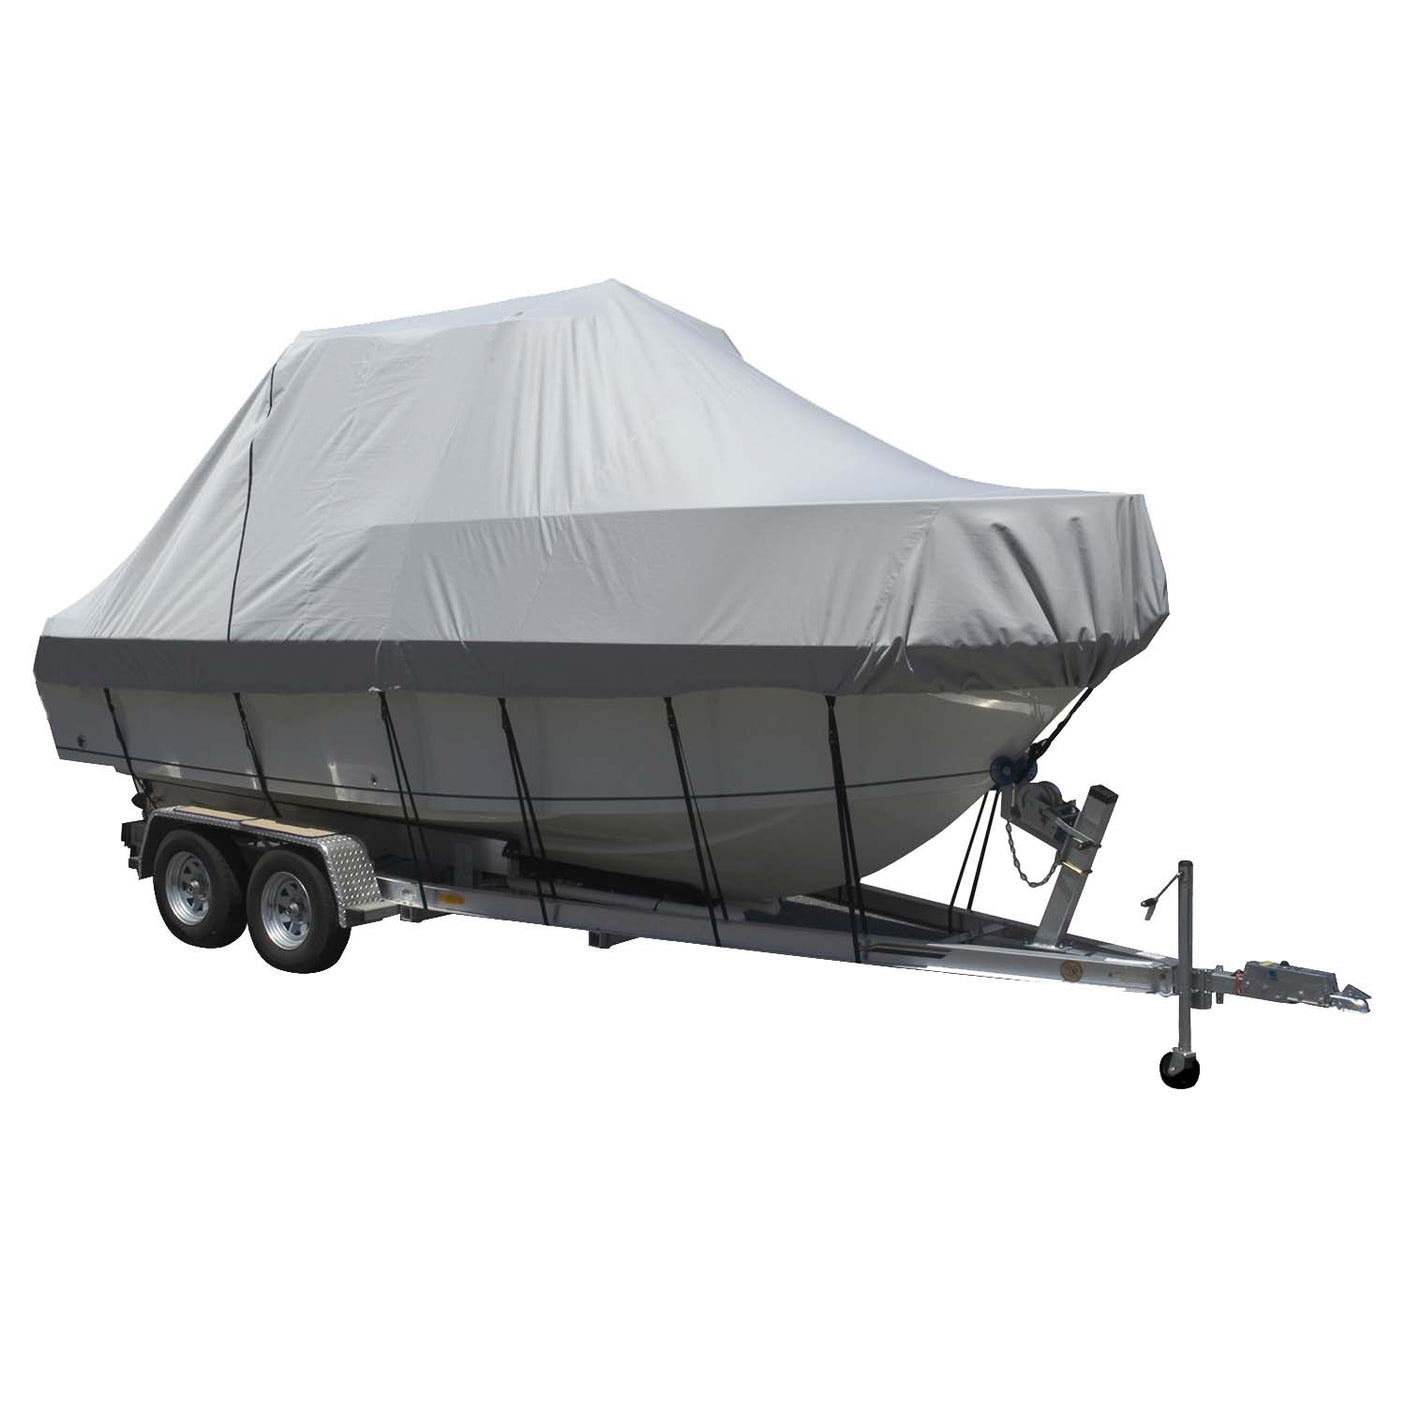 Carver Sun-DURA Specialty Boat Cover f/20.5 Walk Around Cuddy Center Console Boats - Grey - Life Raft Professionals